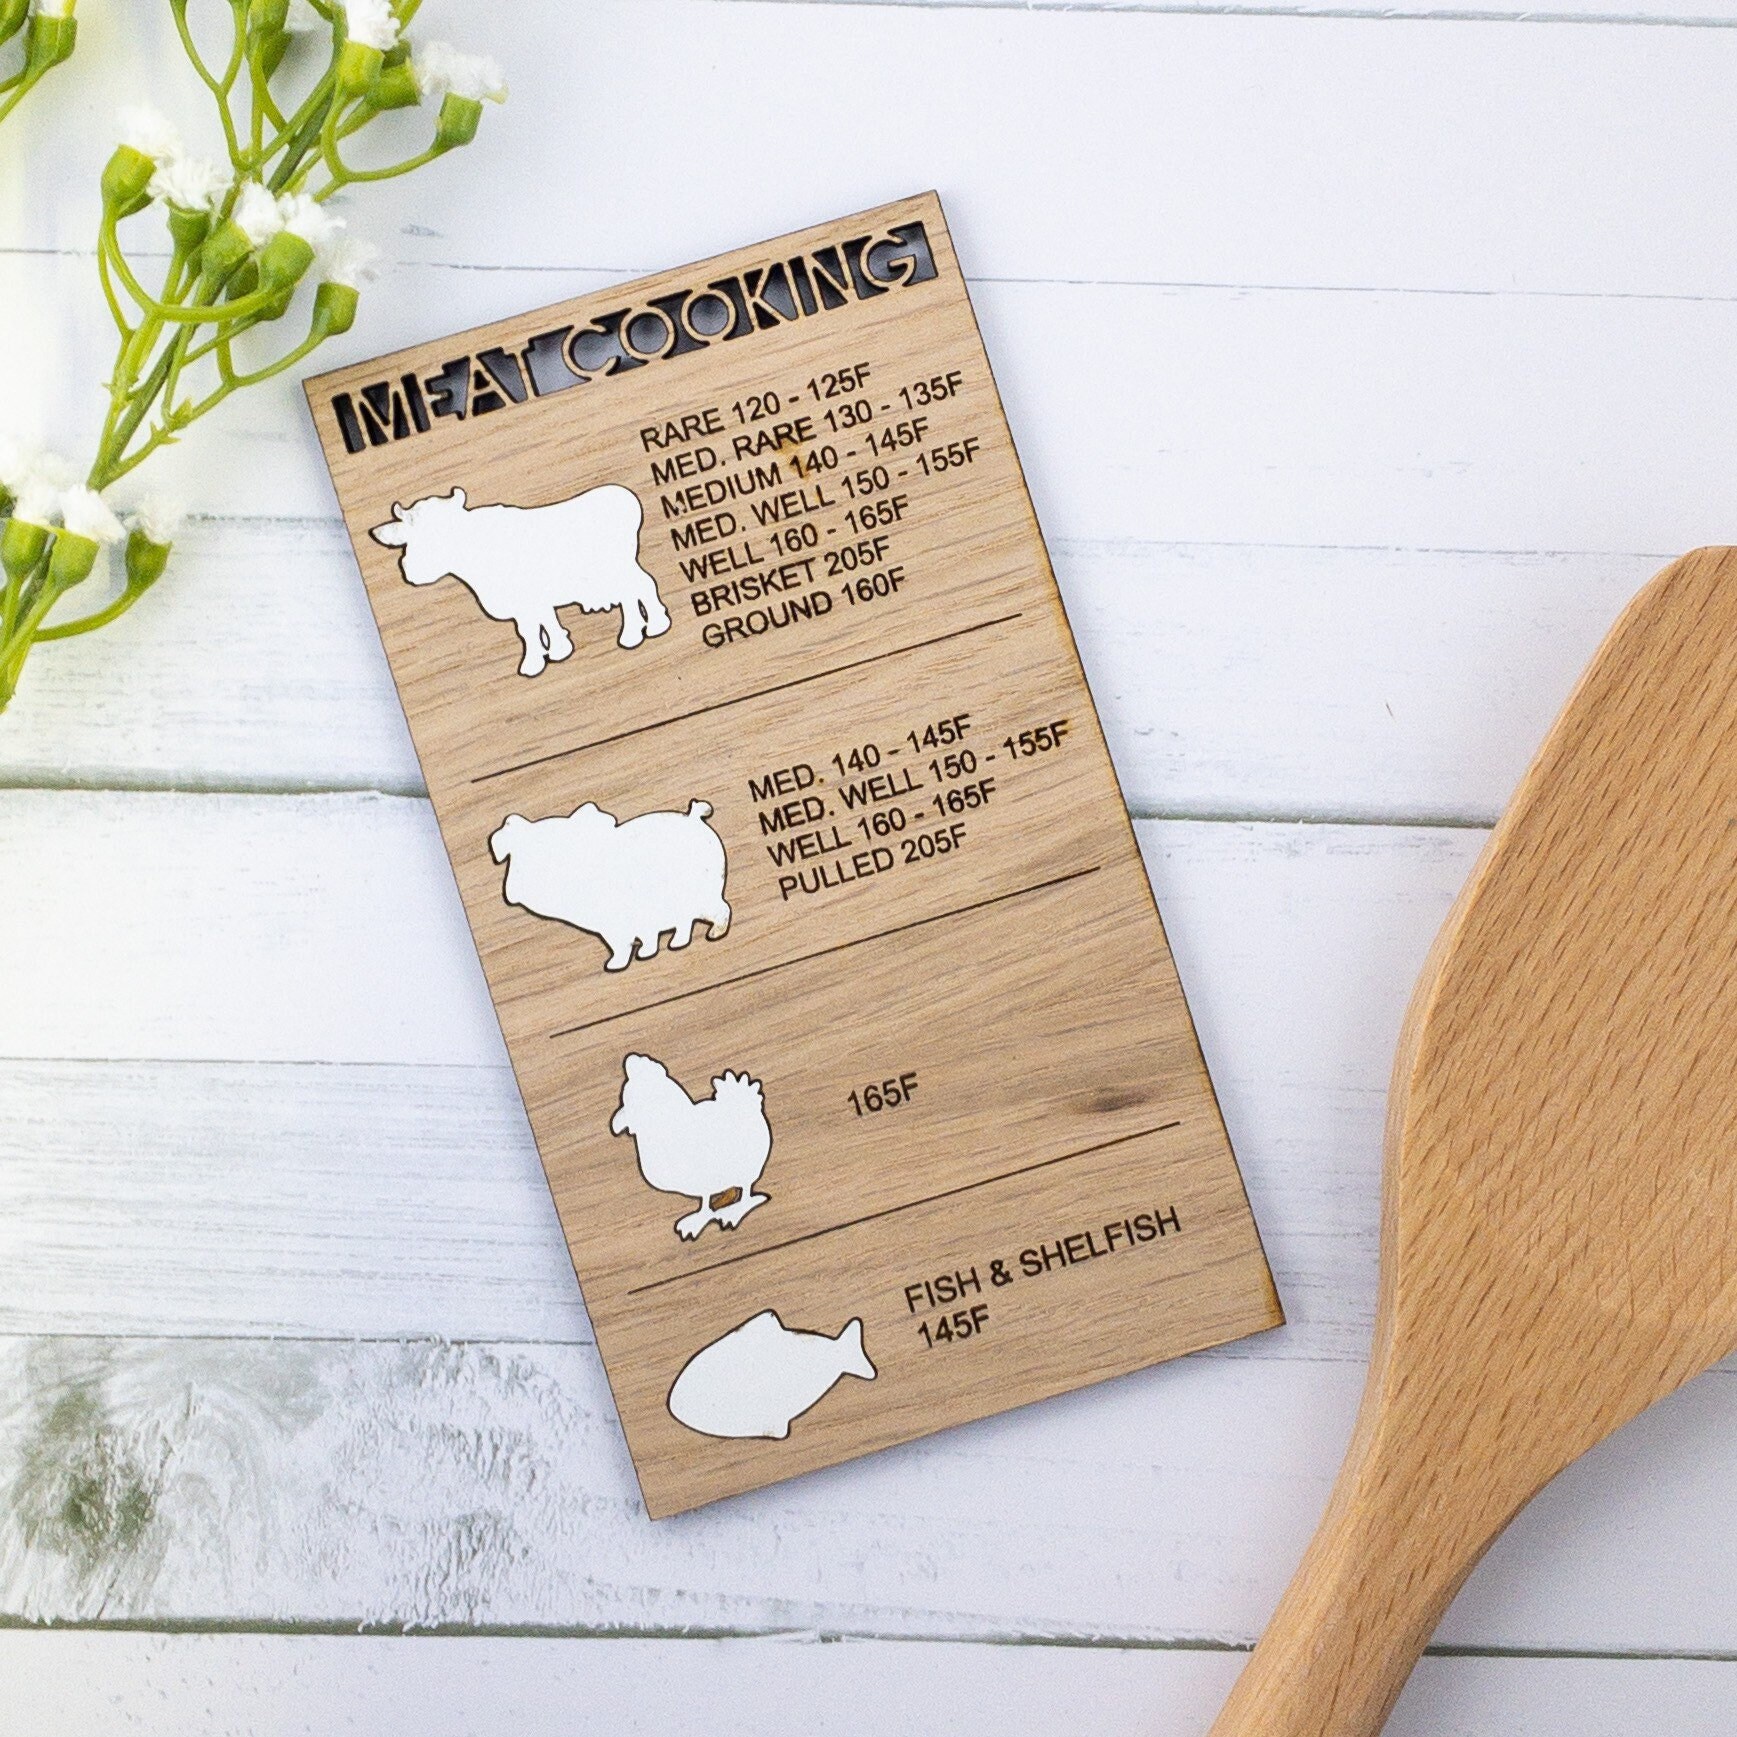 Meat Cooking Temperatures Kitchen Magnet by LeeMo Designs